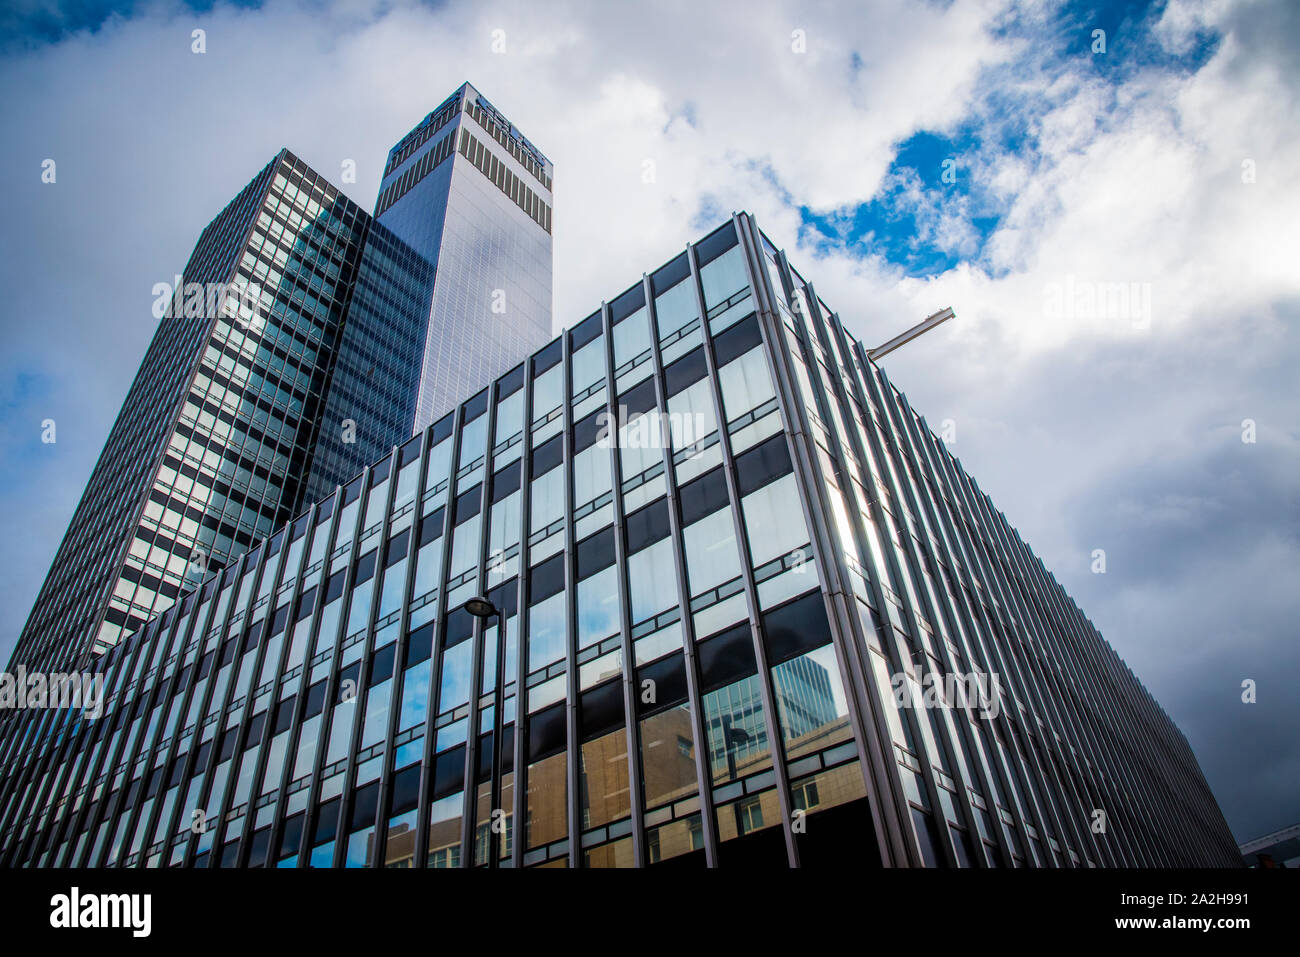 Modern Building with glass windows on a cloudy bright sky in Manchester Stock Photo